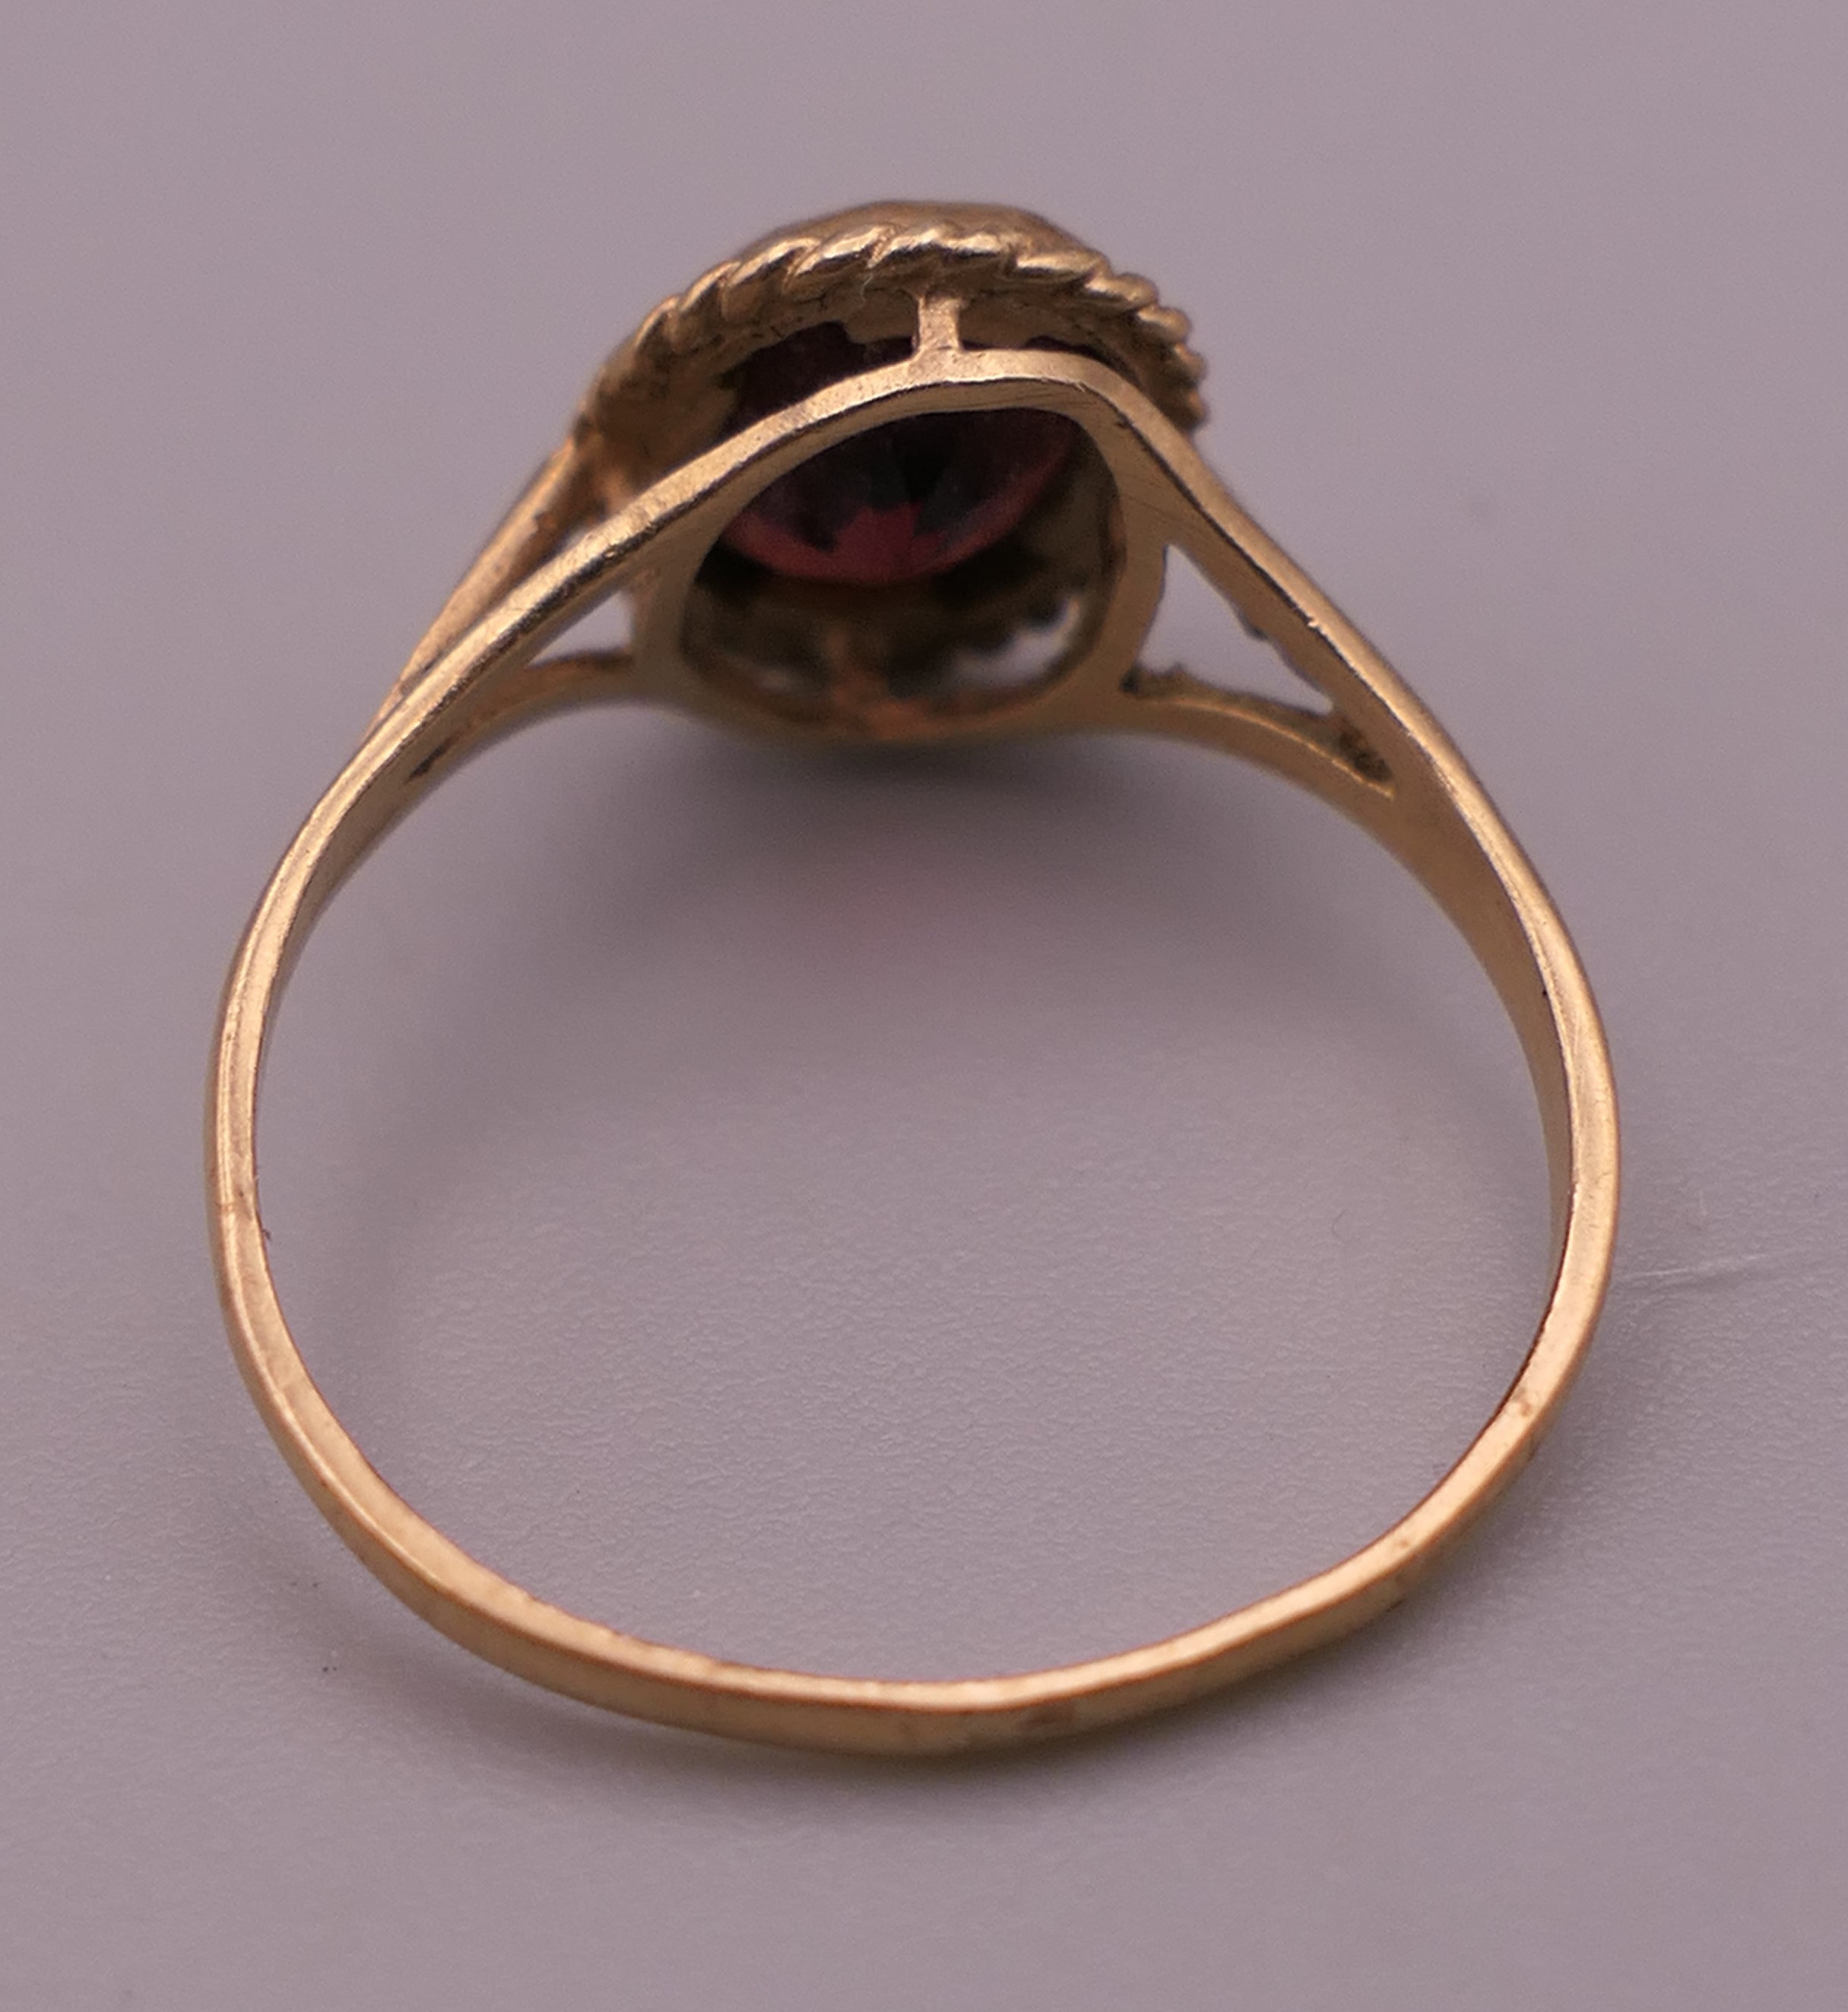 A 9 ct gold garnet ring. Ring size L/M. 1.5 grammes total weight. - Image 4 of 6